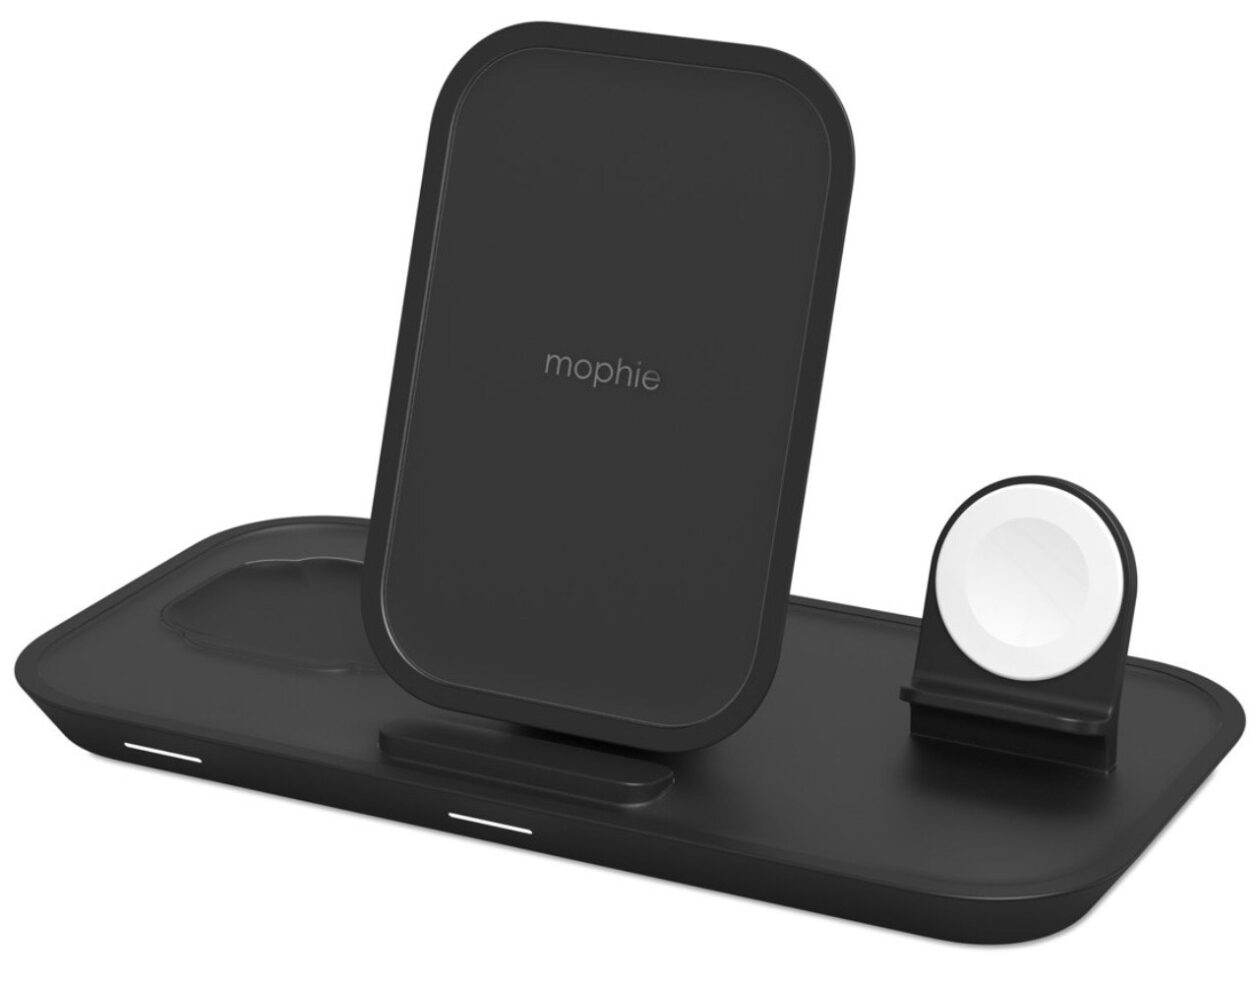 mophie 3-in-1 charger